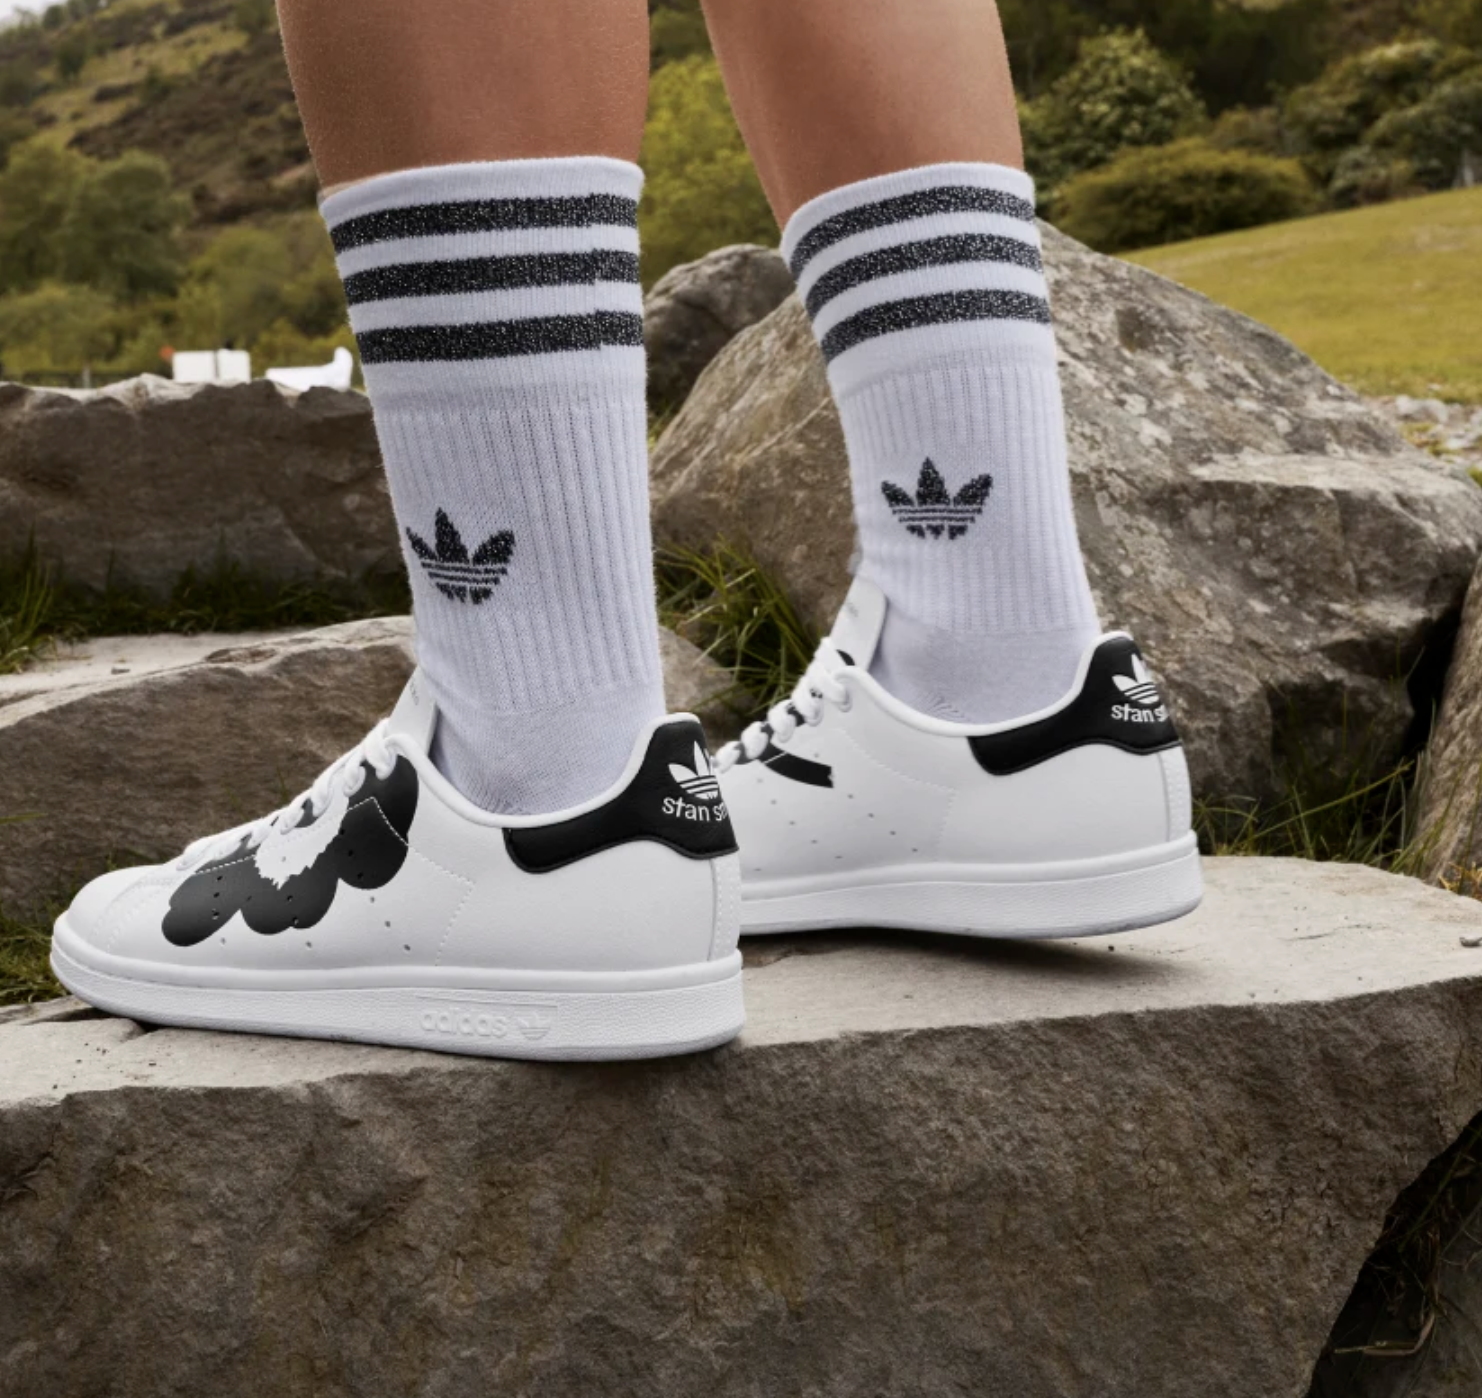 A person wearing the sneakers with crew socks while standing on a rock